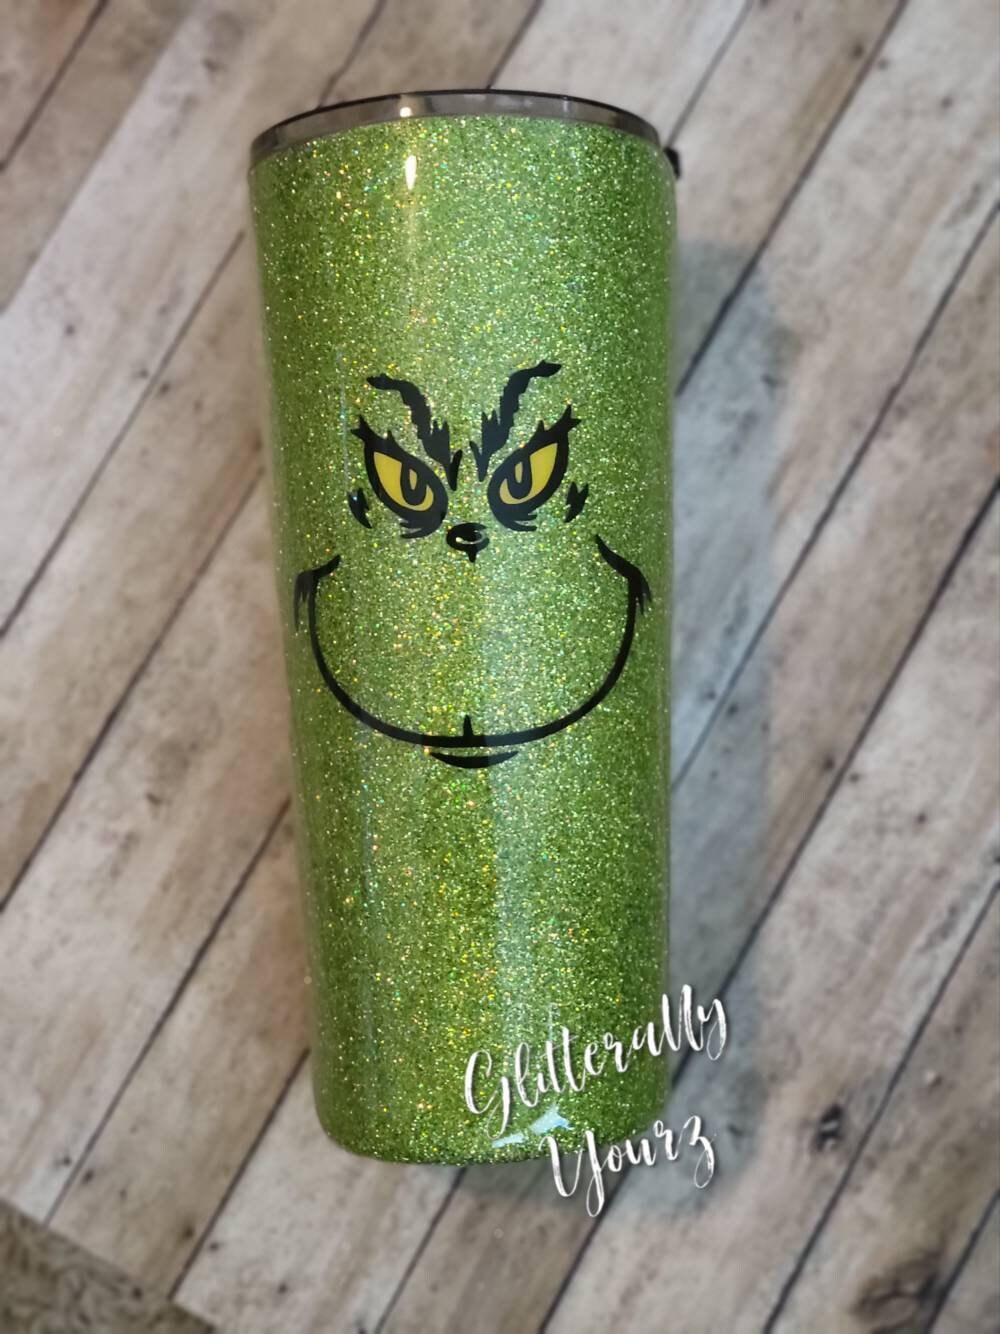 GRINCH CHRISTMAS CUP Grinch Cup Coloring Changing Cup Christmas Cups Vasos  De Navidad Christmas Gifts 